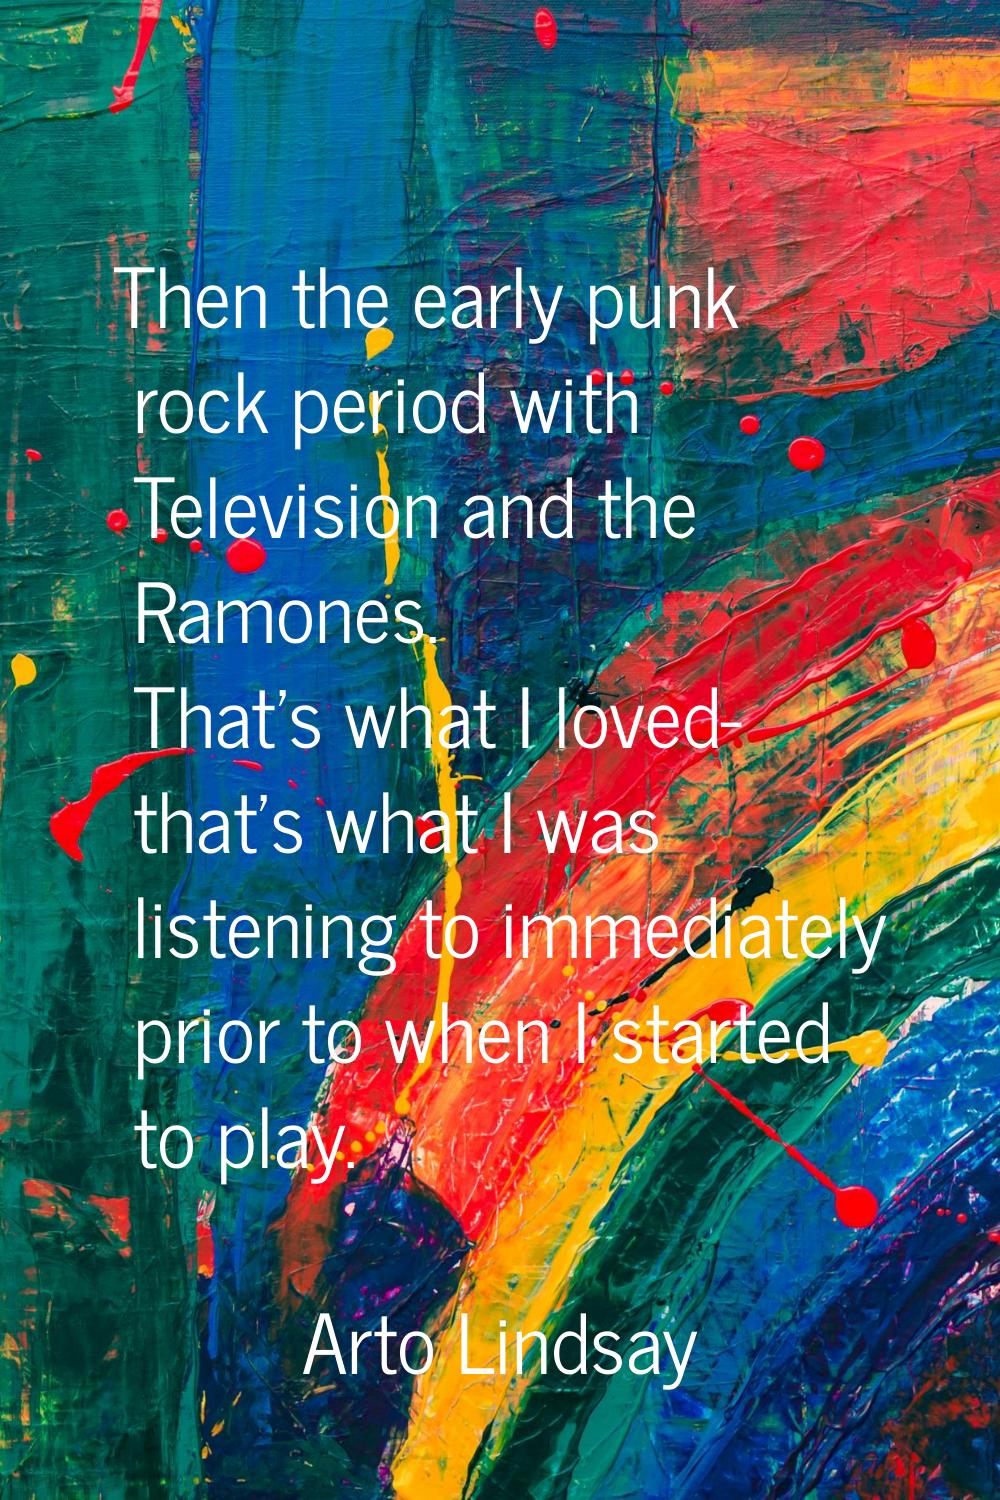 Then the early punk rock period with Television and the Ramones. That's what I loved- that's what I